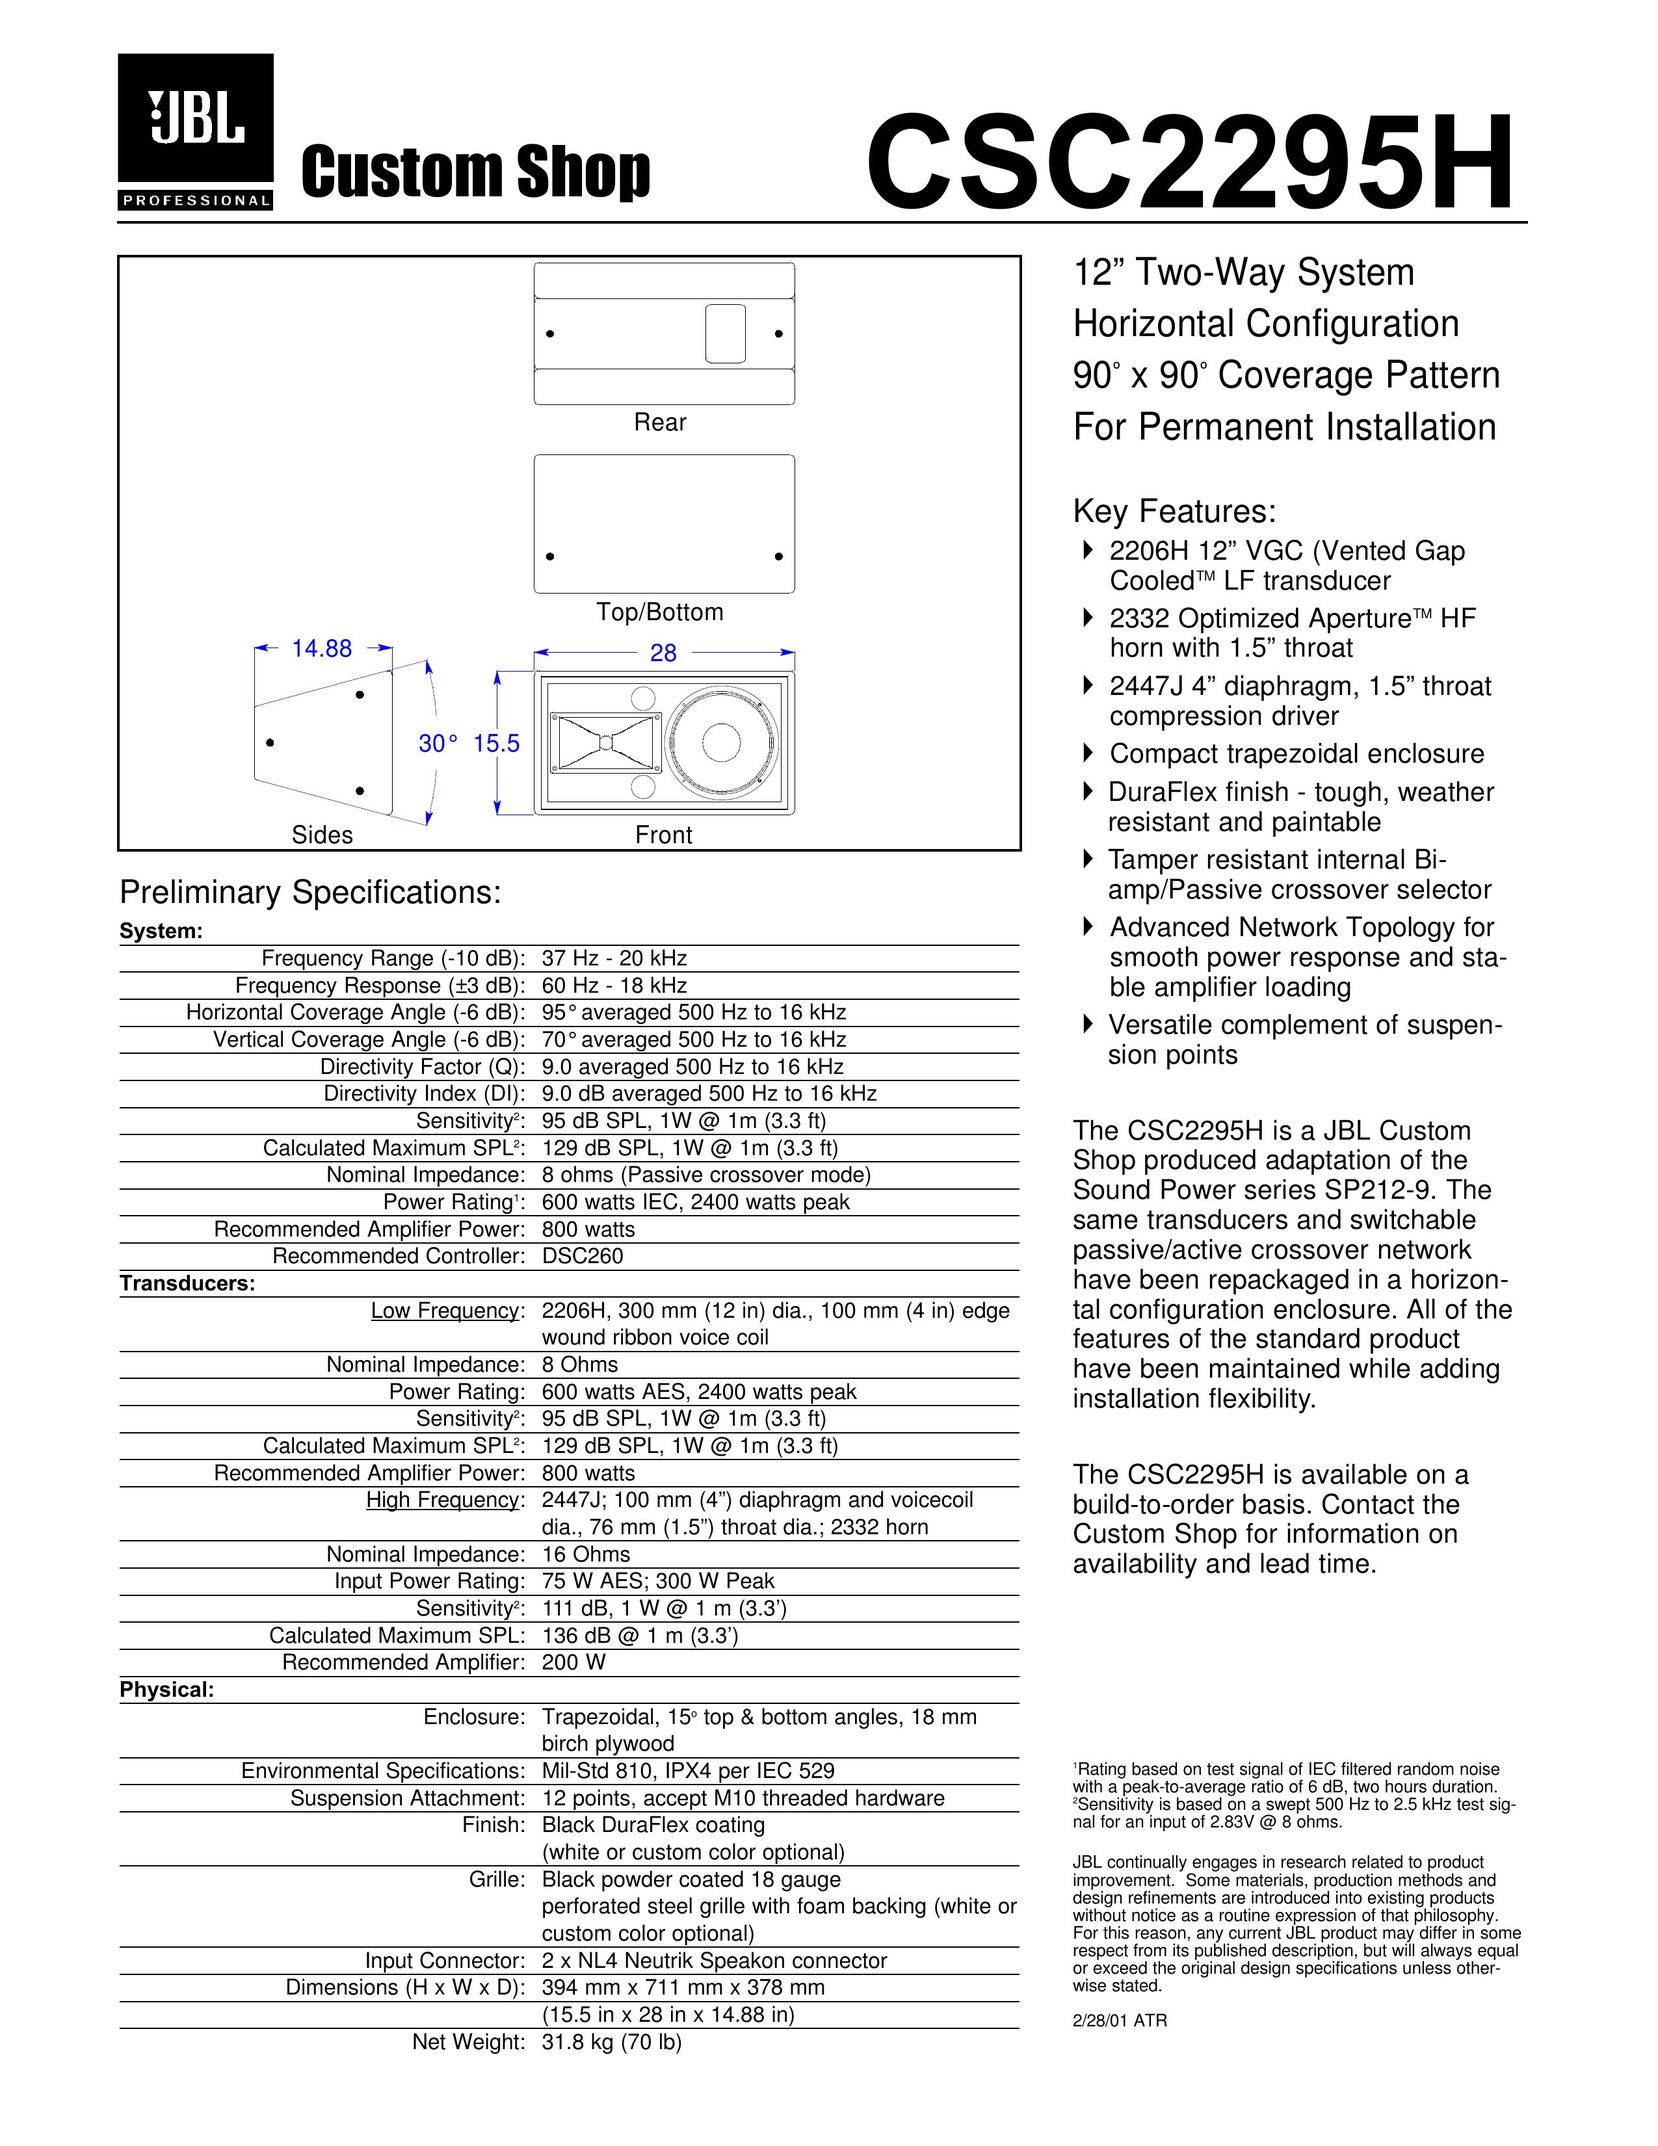 JBL CSC2295H Home Theater System User Manual